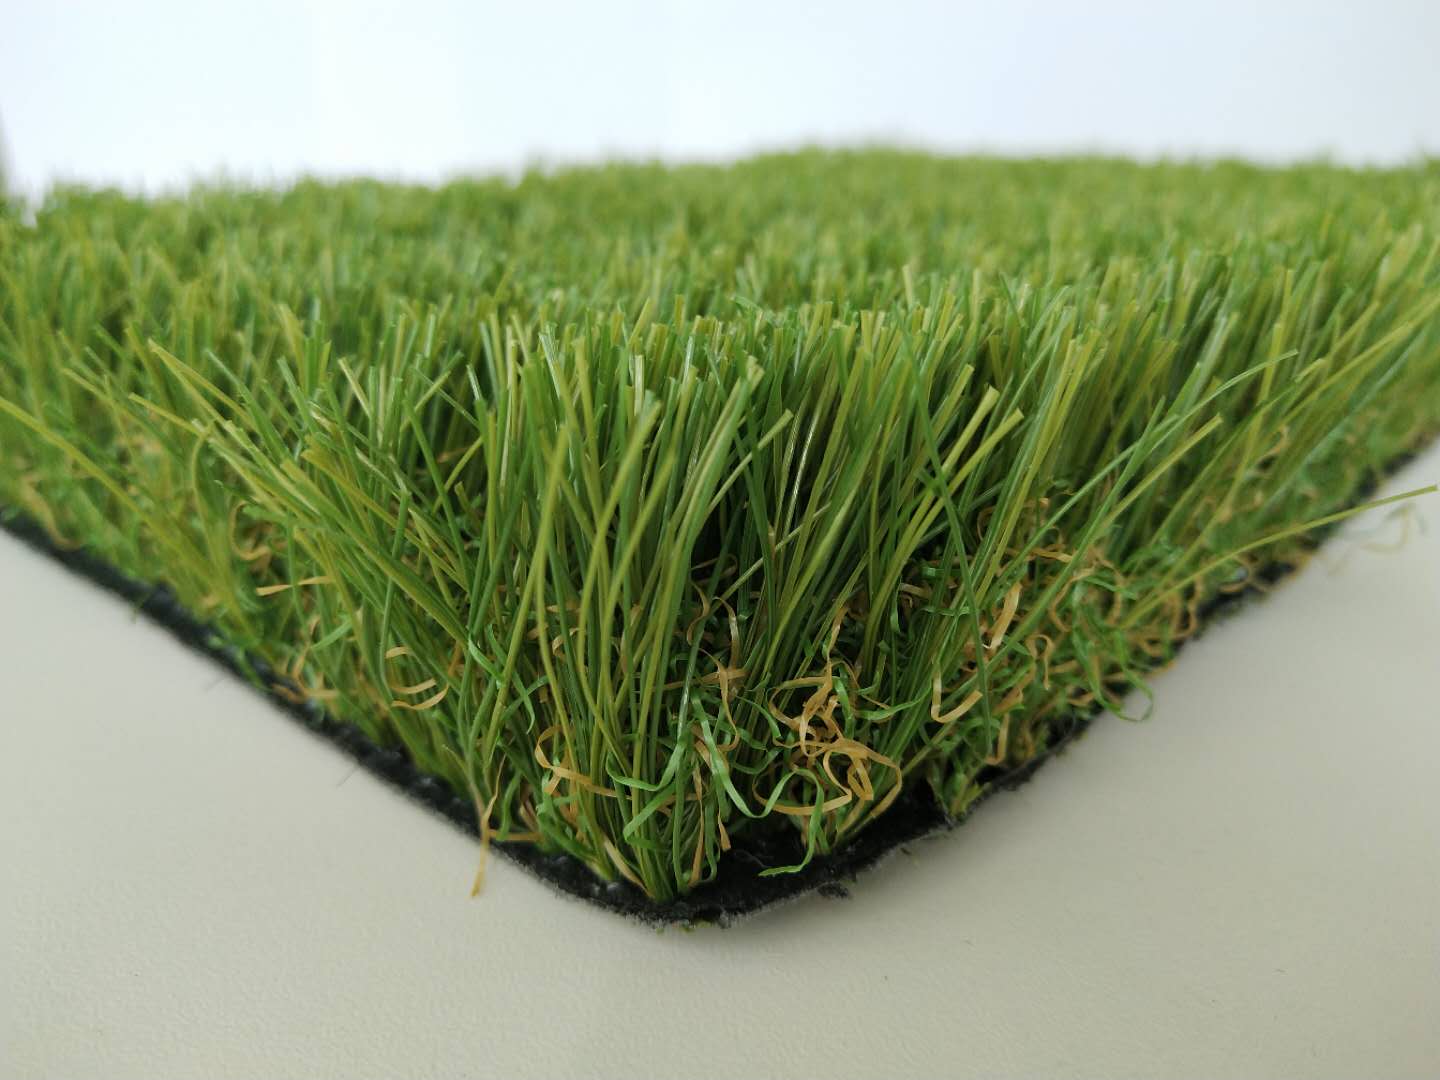 skin-friendly soft playgroud turf for Recreation